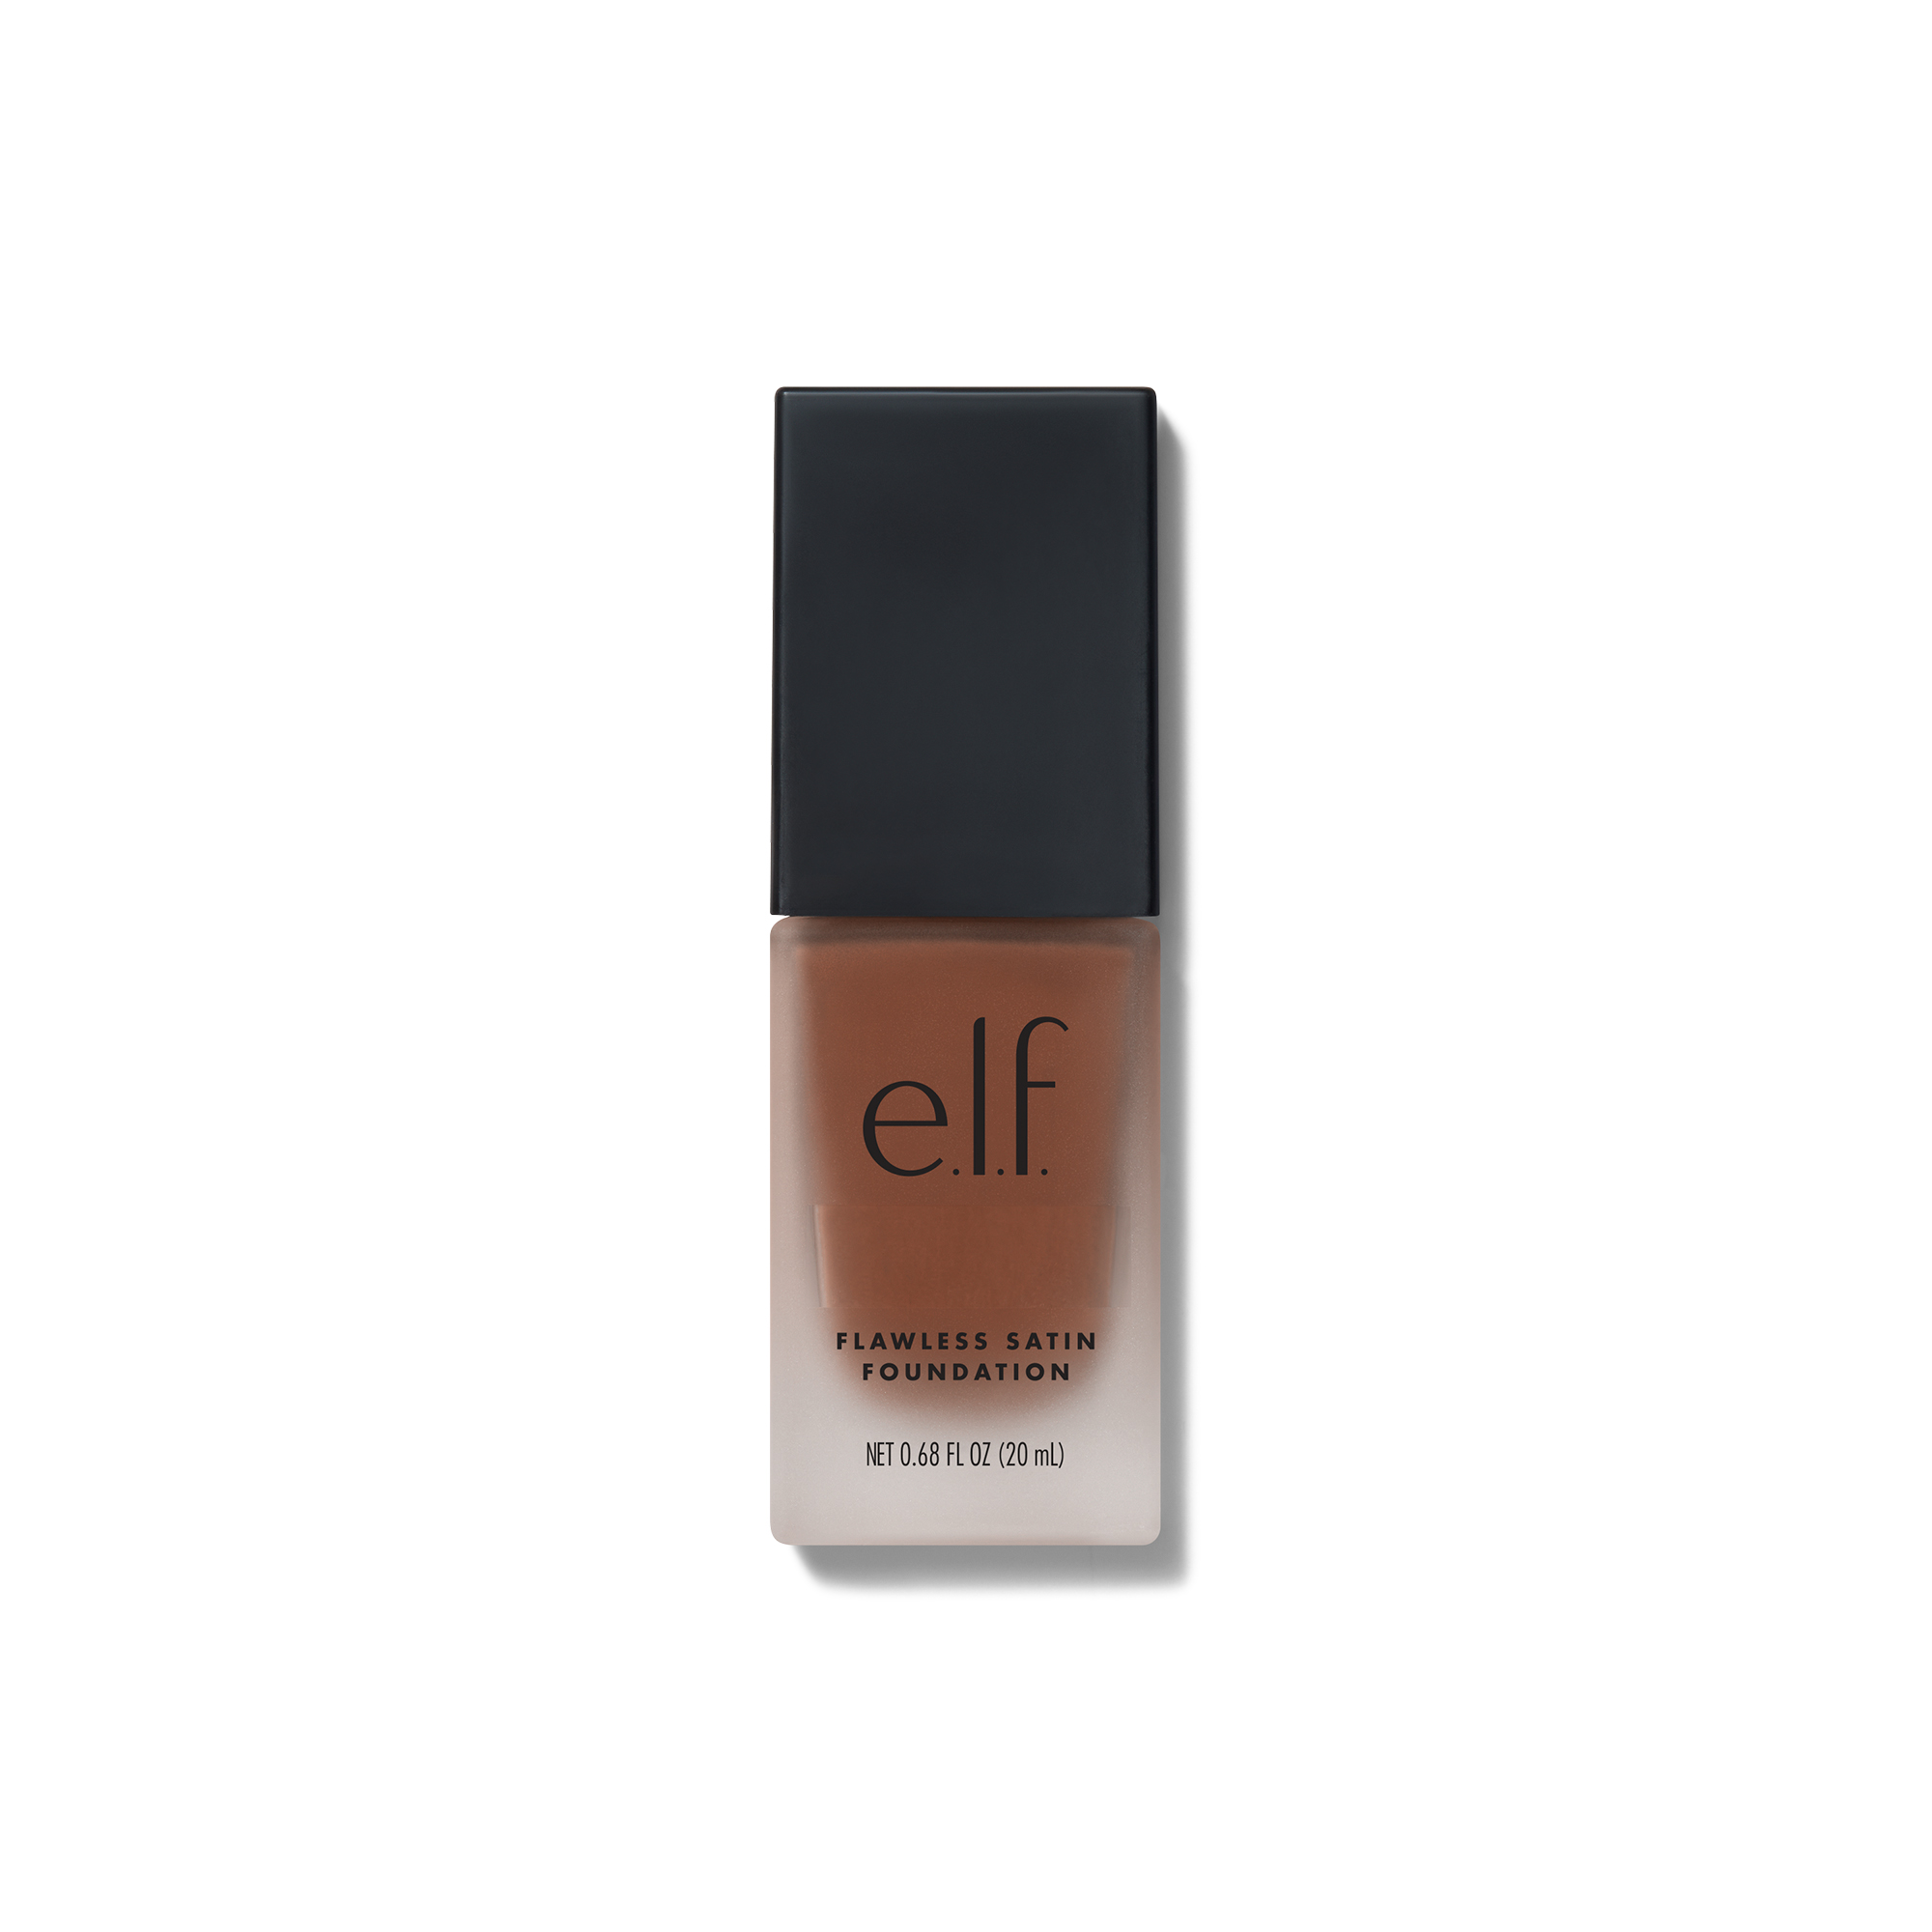 Bottle of e.l.f. flawless satin foundation.